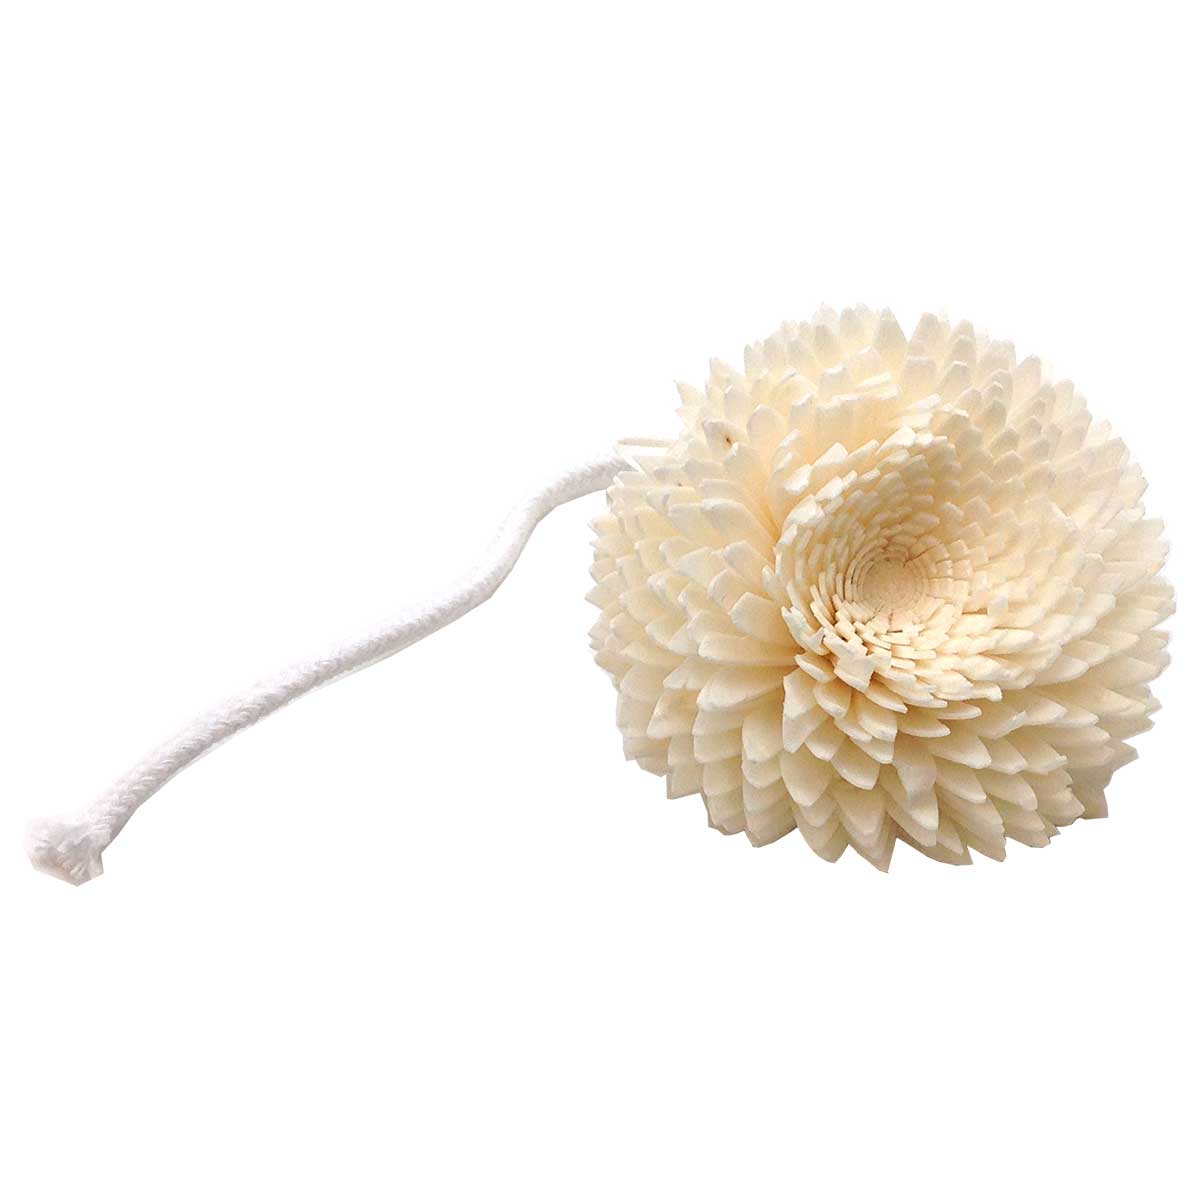 Wholesale Sola Aroma Flower Diffuser